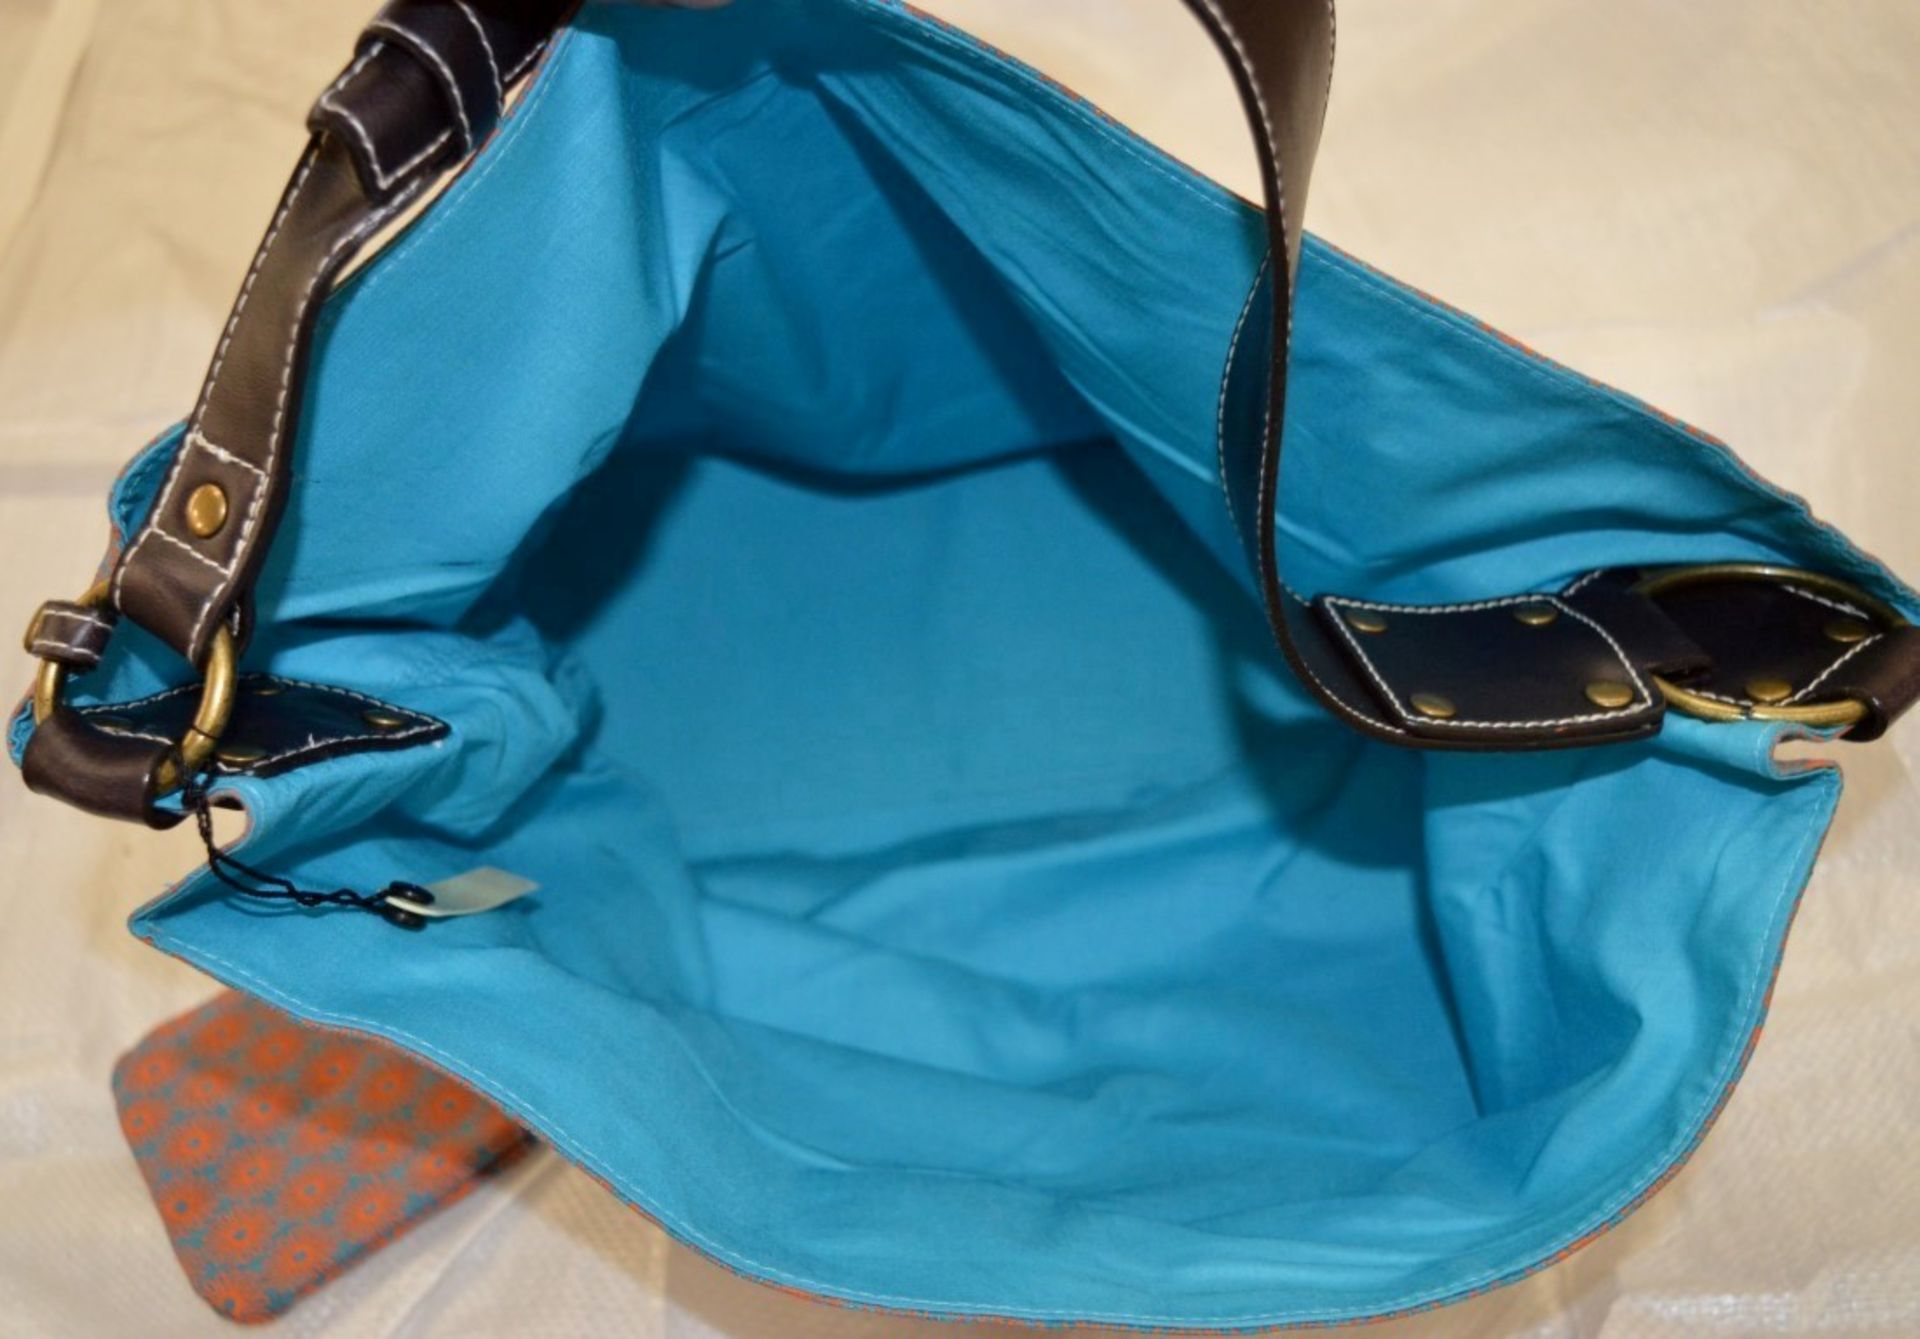 5 x Miso Shopper Bags - Hardwearing Material With Blue Inner Fabric, Leather Handle and Internal - Image 3 of 5